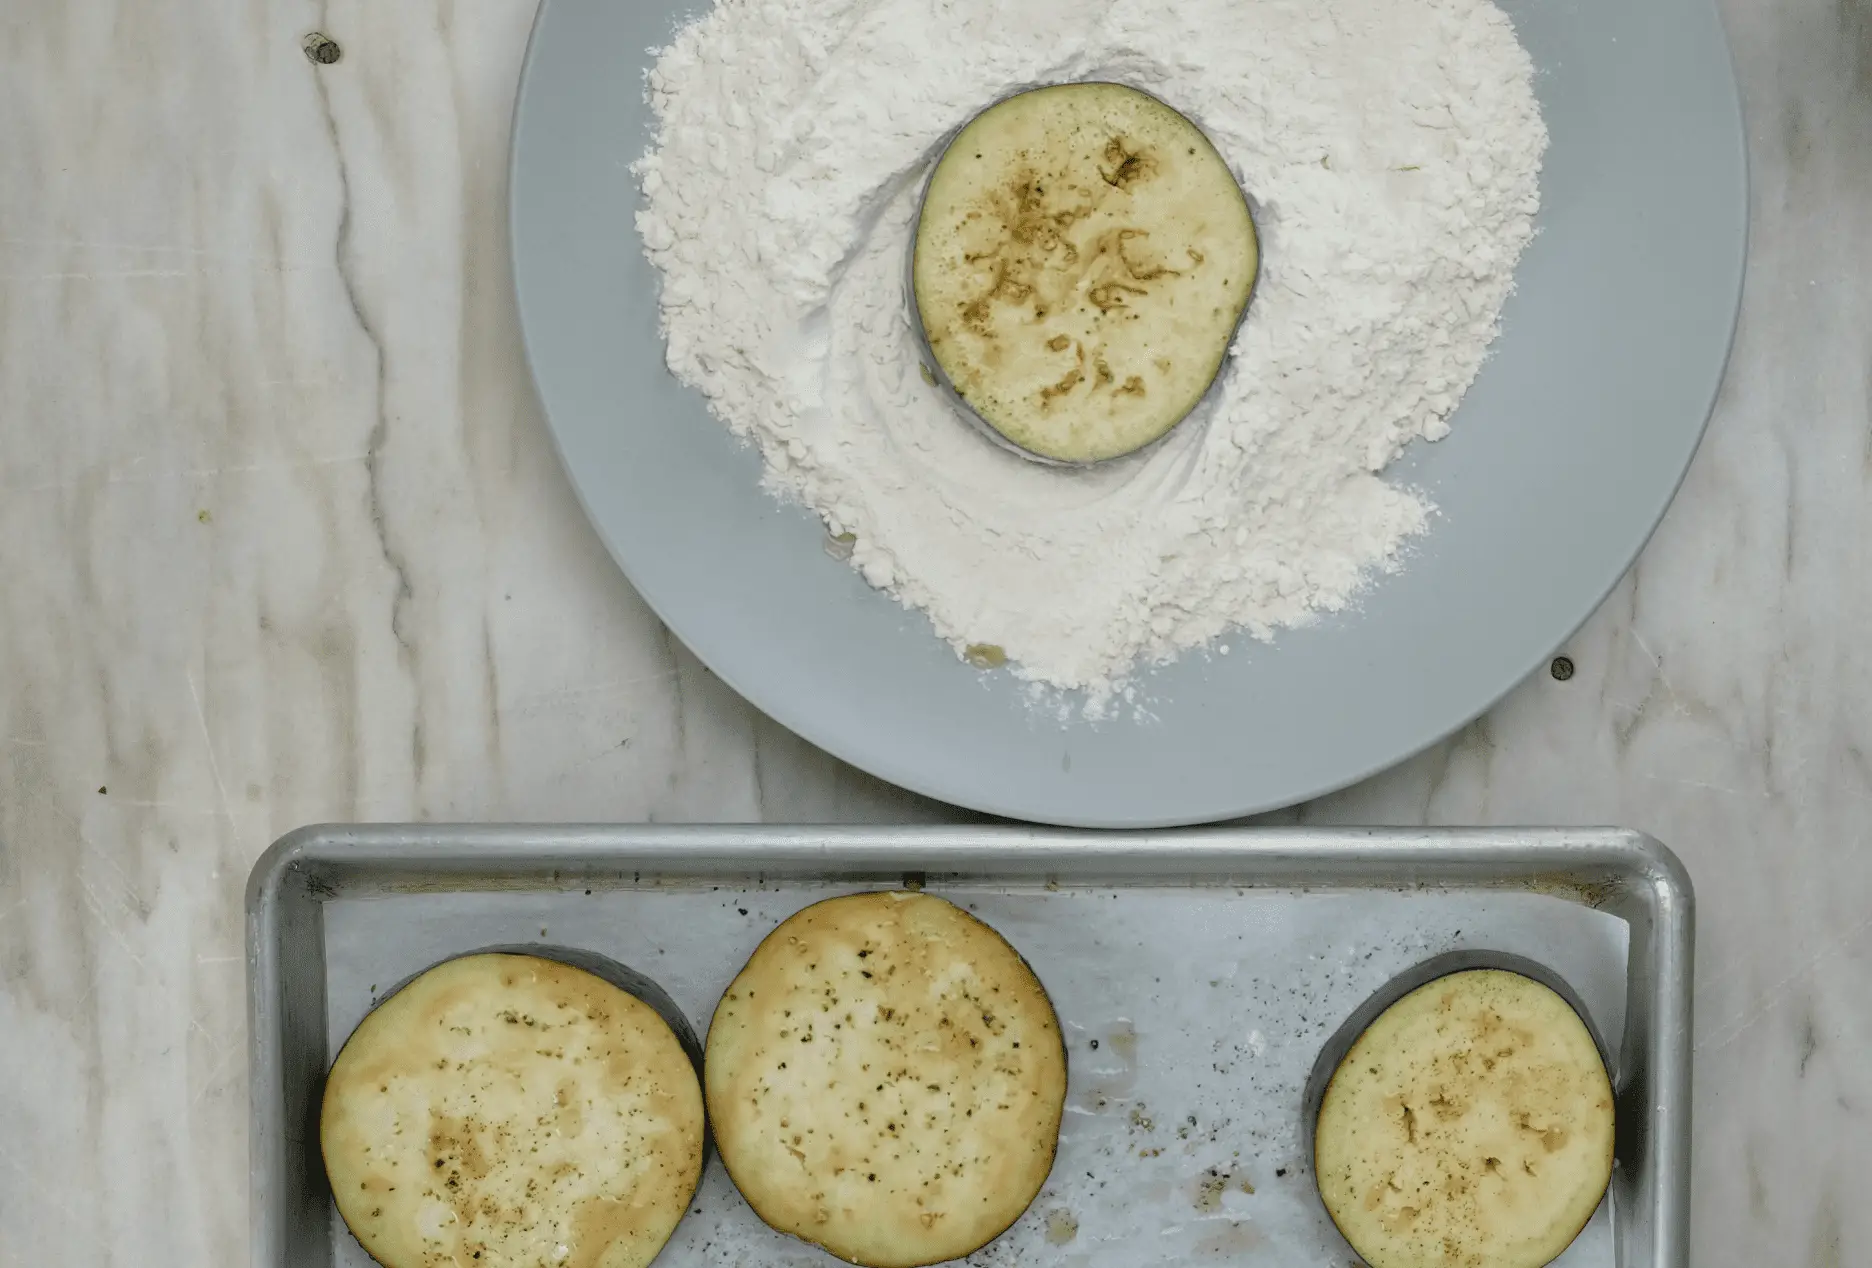 COATING EGGPLANT WITH FLOUR for eggplant parm